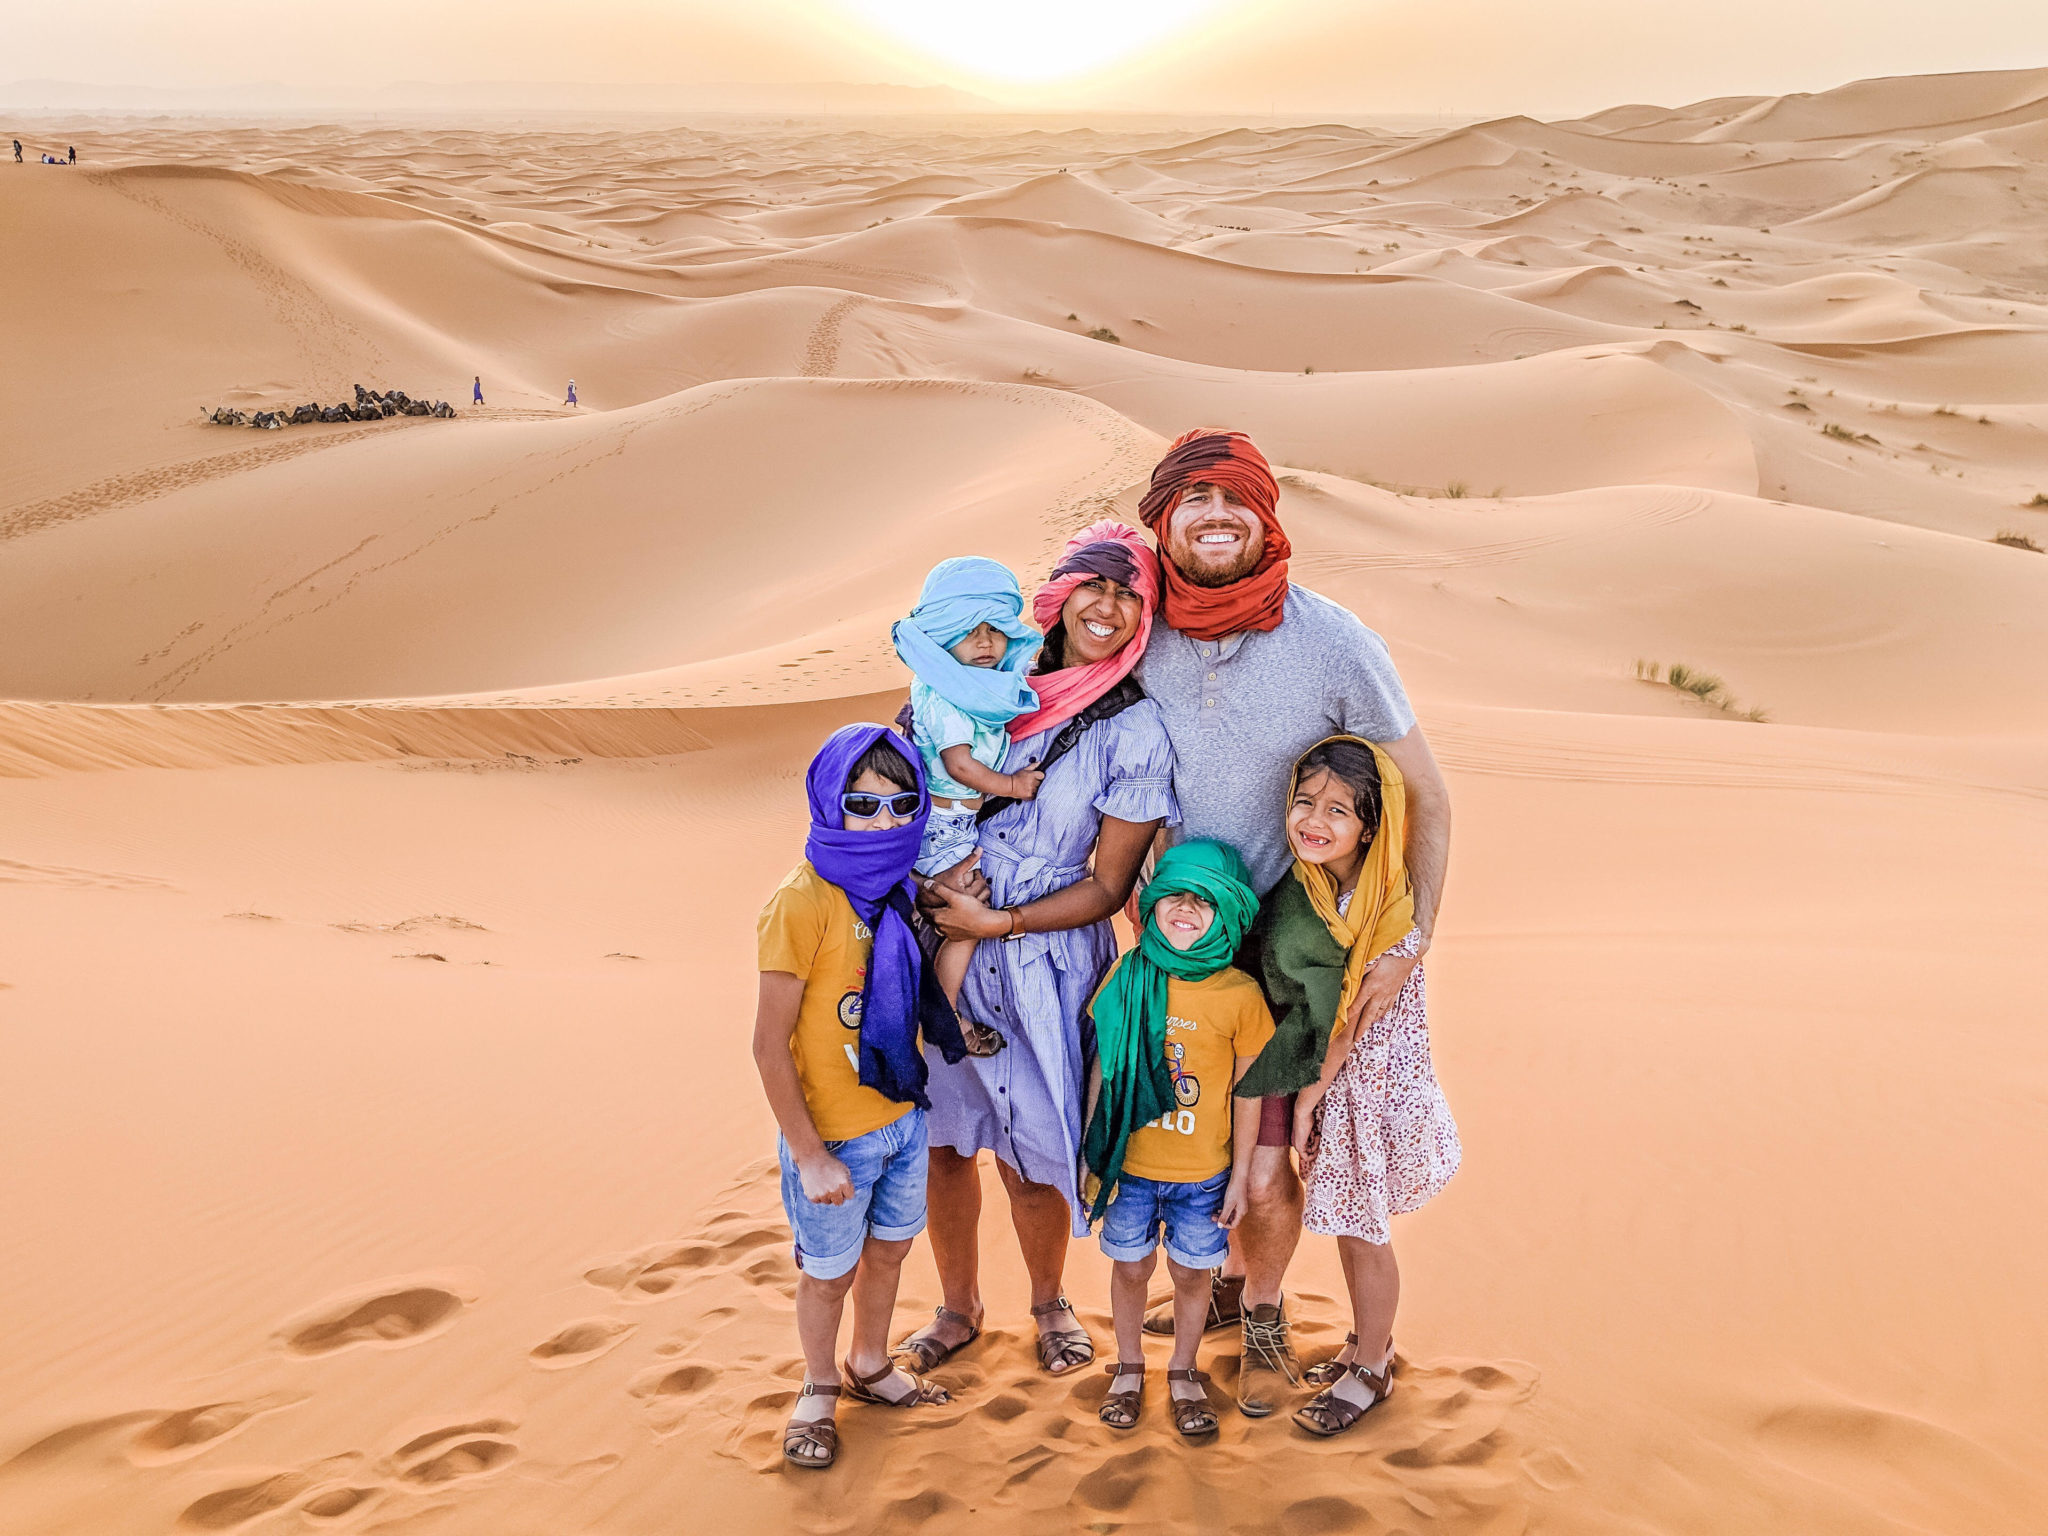 sahara desert morocco family holiday | 7 Reasons to Take a Morocco Family Vacation by popular Northern California travel blog, Local Passport Family: image of a family standing together on a sand dune in the Sahara Desert.